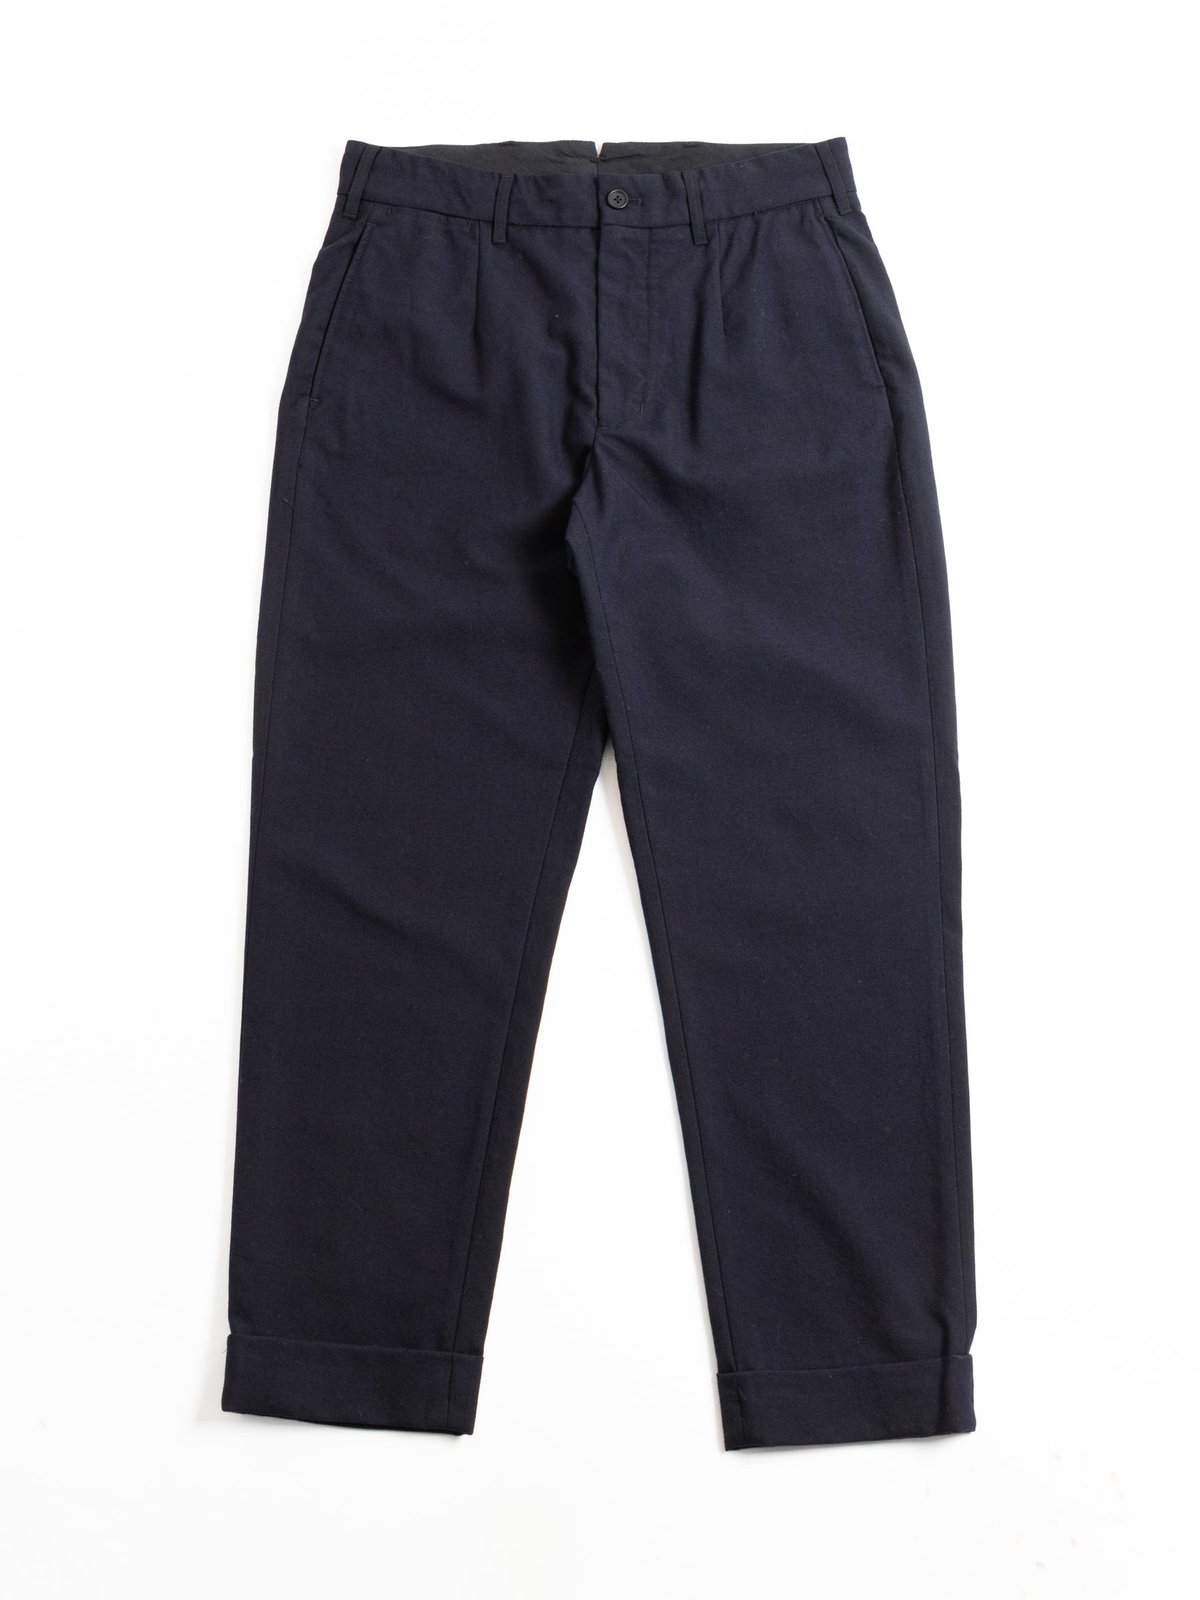 ANDOVER PANT DARK NAVY UNIFORM SERGE by Engineered Garments – The ...